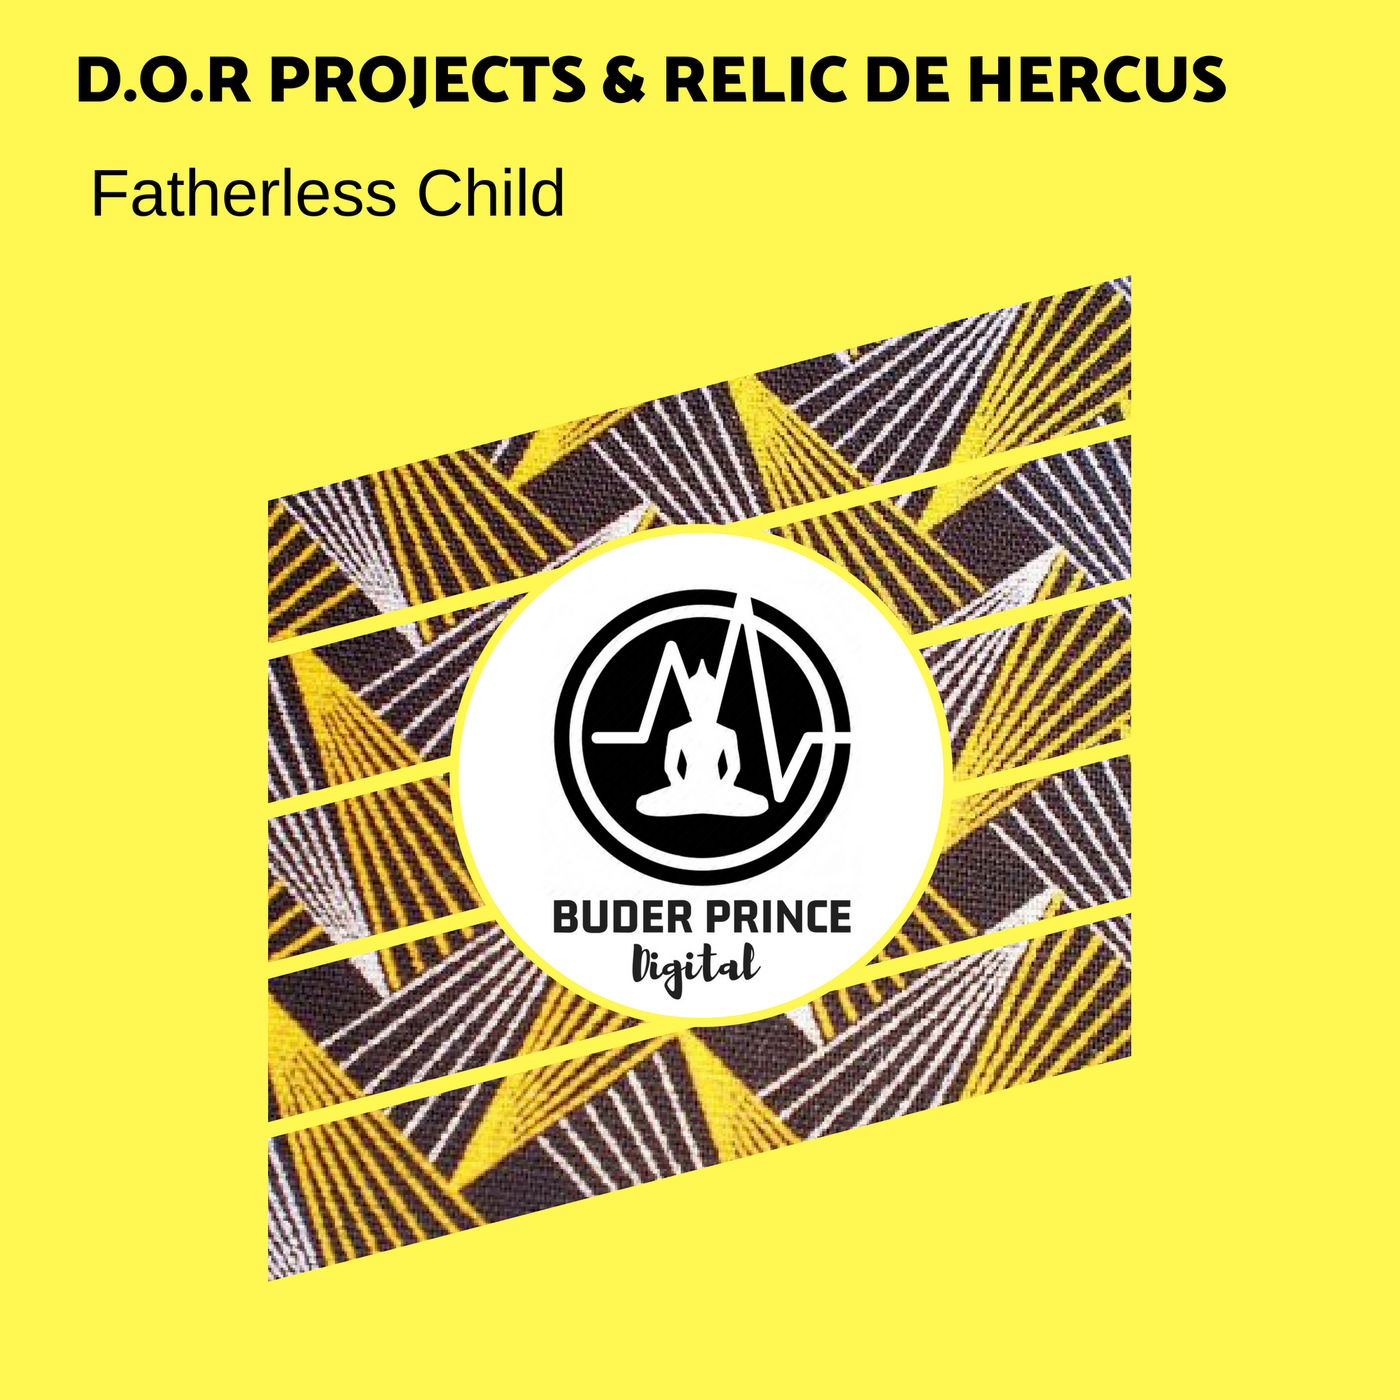 D.o.r Projects & Relic De Hercus - Fatherless Child / Buder Prince Digital